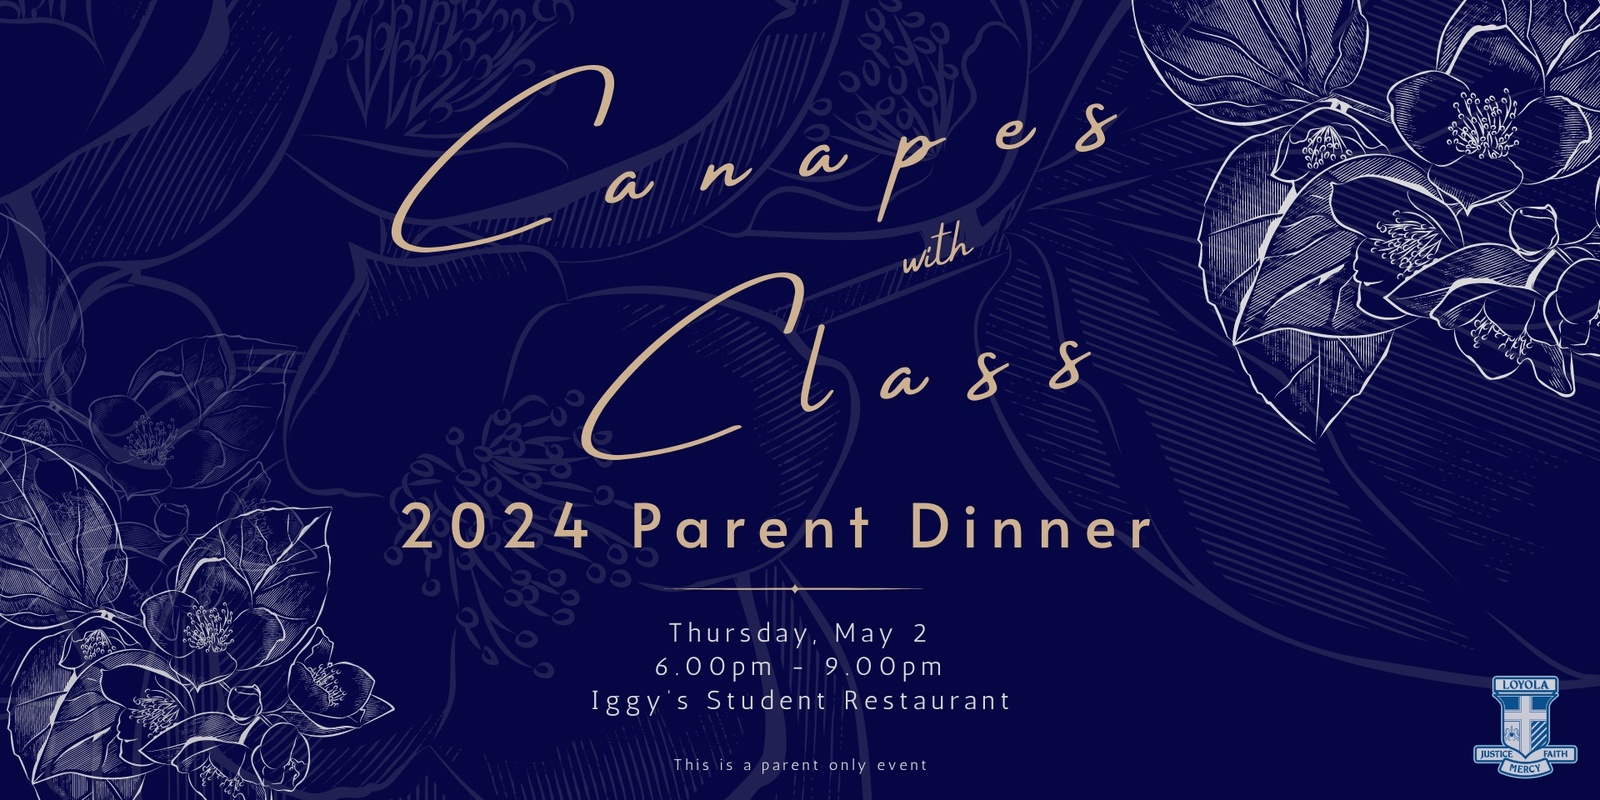 Banner image for Canapes with Class - Parent Dinner